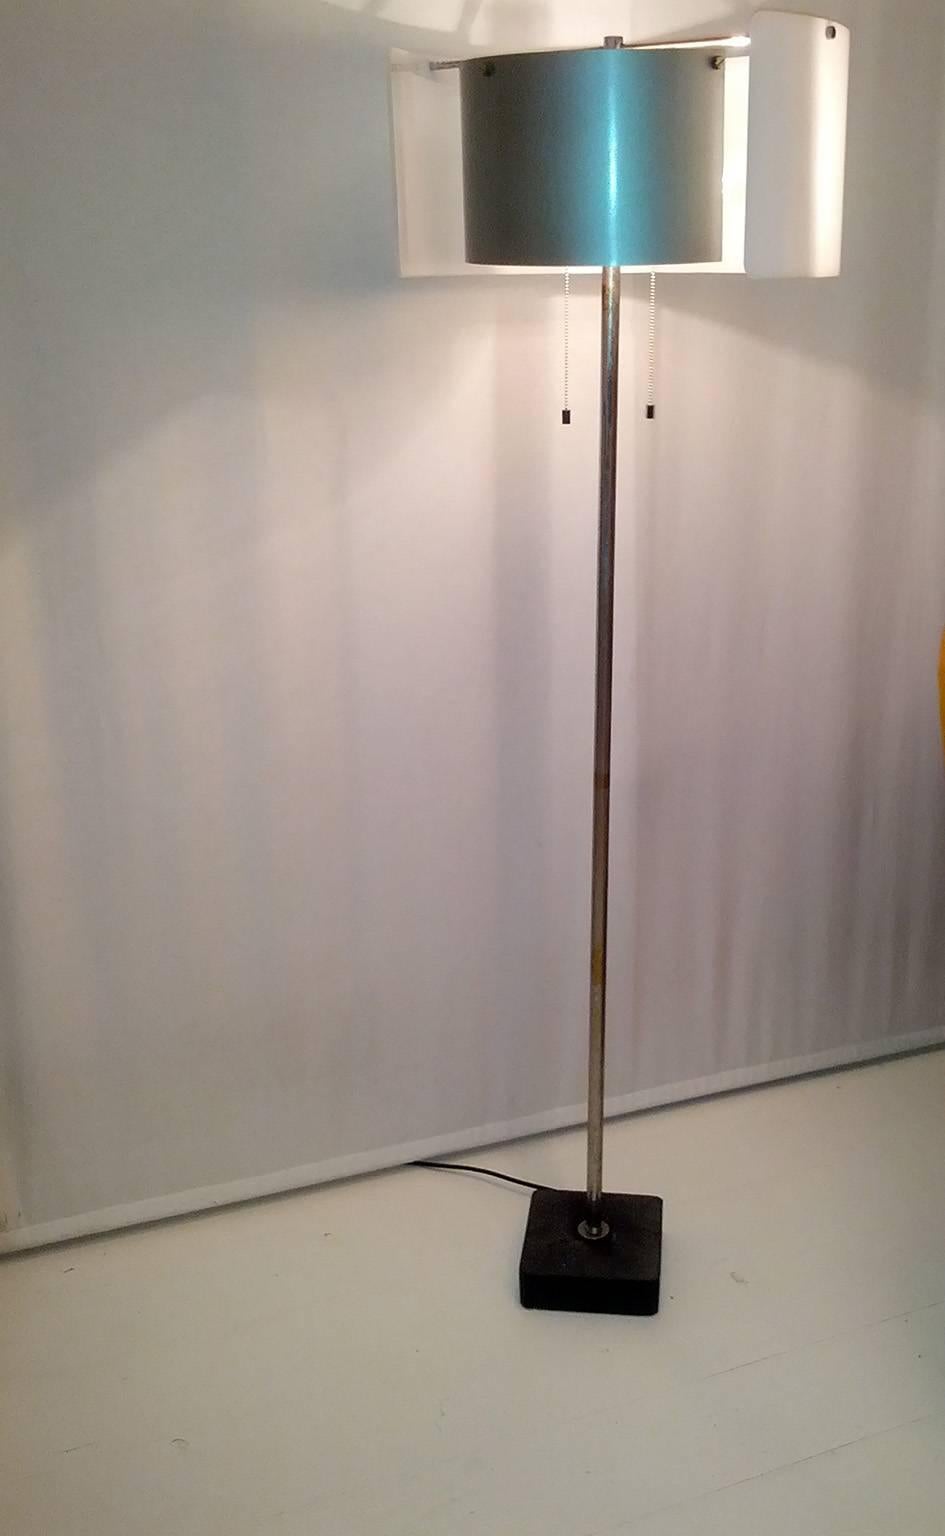 Wonderful rare floor lamp designed by Gino Sarfatti and manufactured by Arteluce during the 1950s. Mod.n.1056.
Made of methacrylate, aluminium, chrome-plated brass, cast iron.
This example is in good original condition with oxidations on the